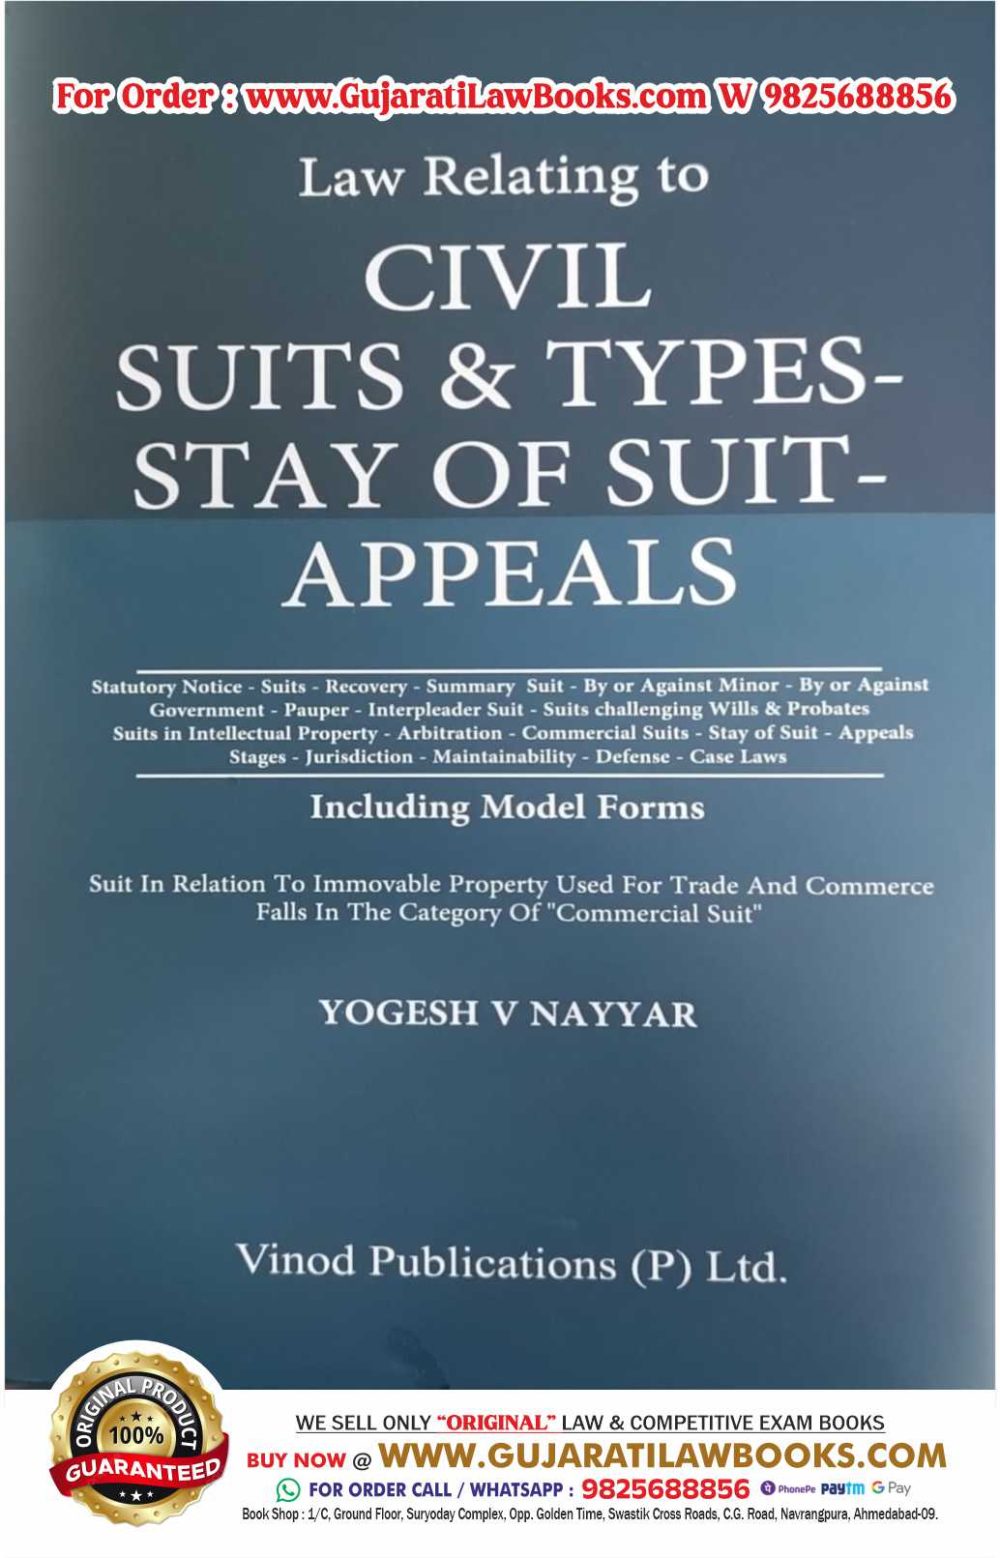 Law Relating to CIVIL SUITS & TYPES - STAY OF SUIT - APPEALS - by Yogesh V Nayyar - Latest 2024 Edition Vinod